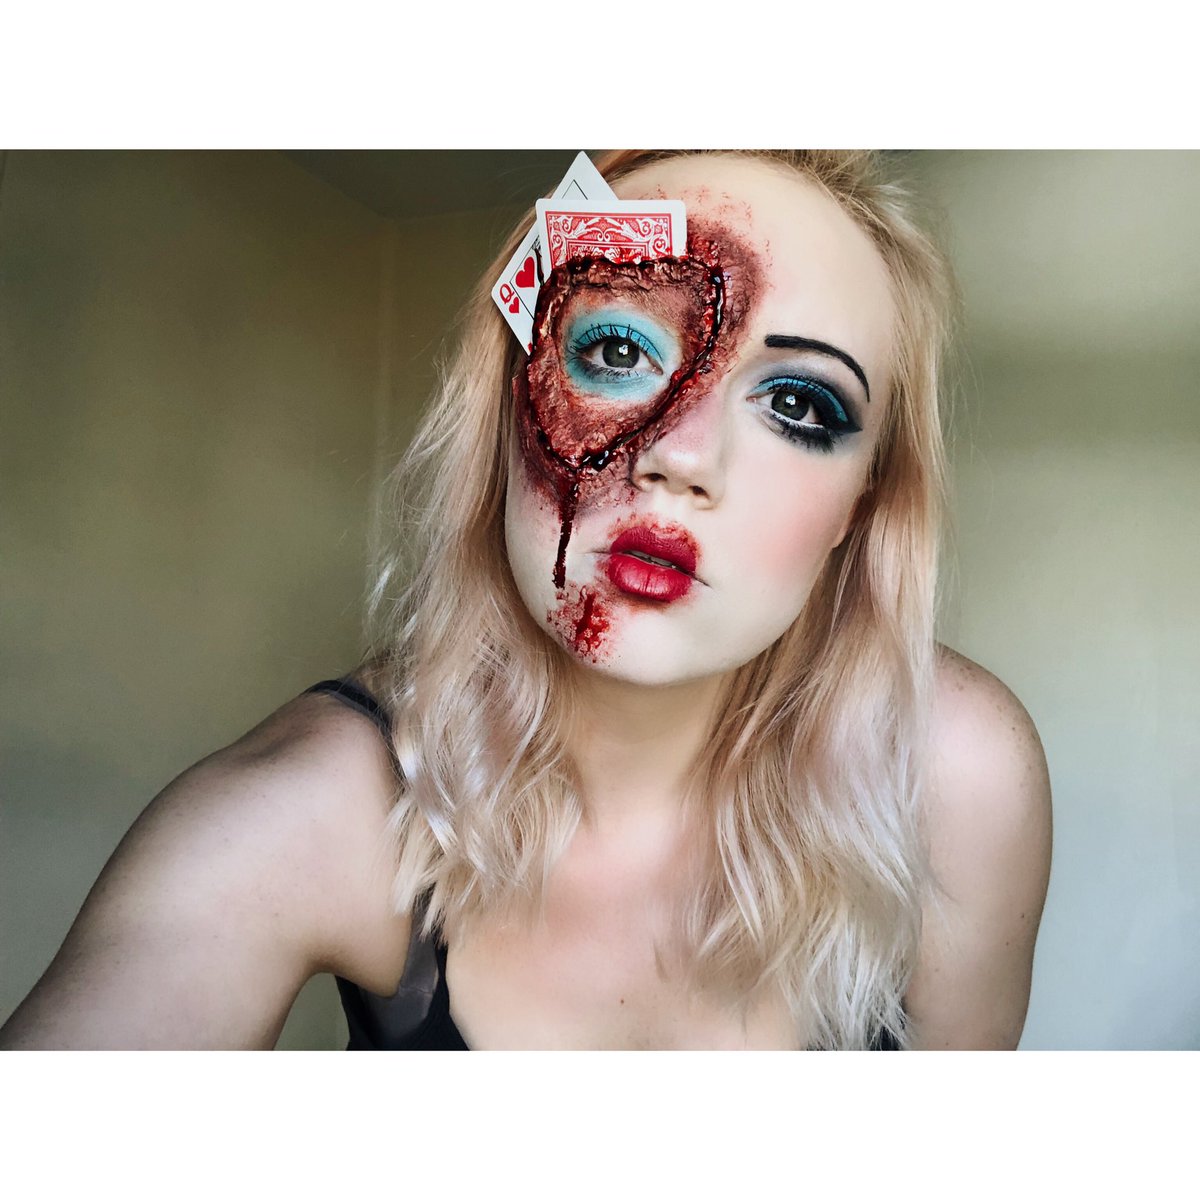 Courtney در توییتر Recreated The Queen Of Hearts Makeup By Cosmobyhaley And I Couldn T Be Happier With How This Came Out Halloween2k18 Glam Gore Queenofhearts T Co Z3plnpkw0k